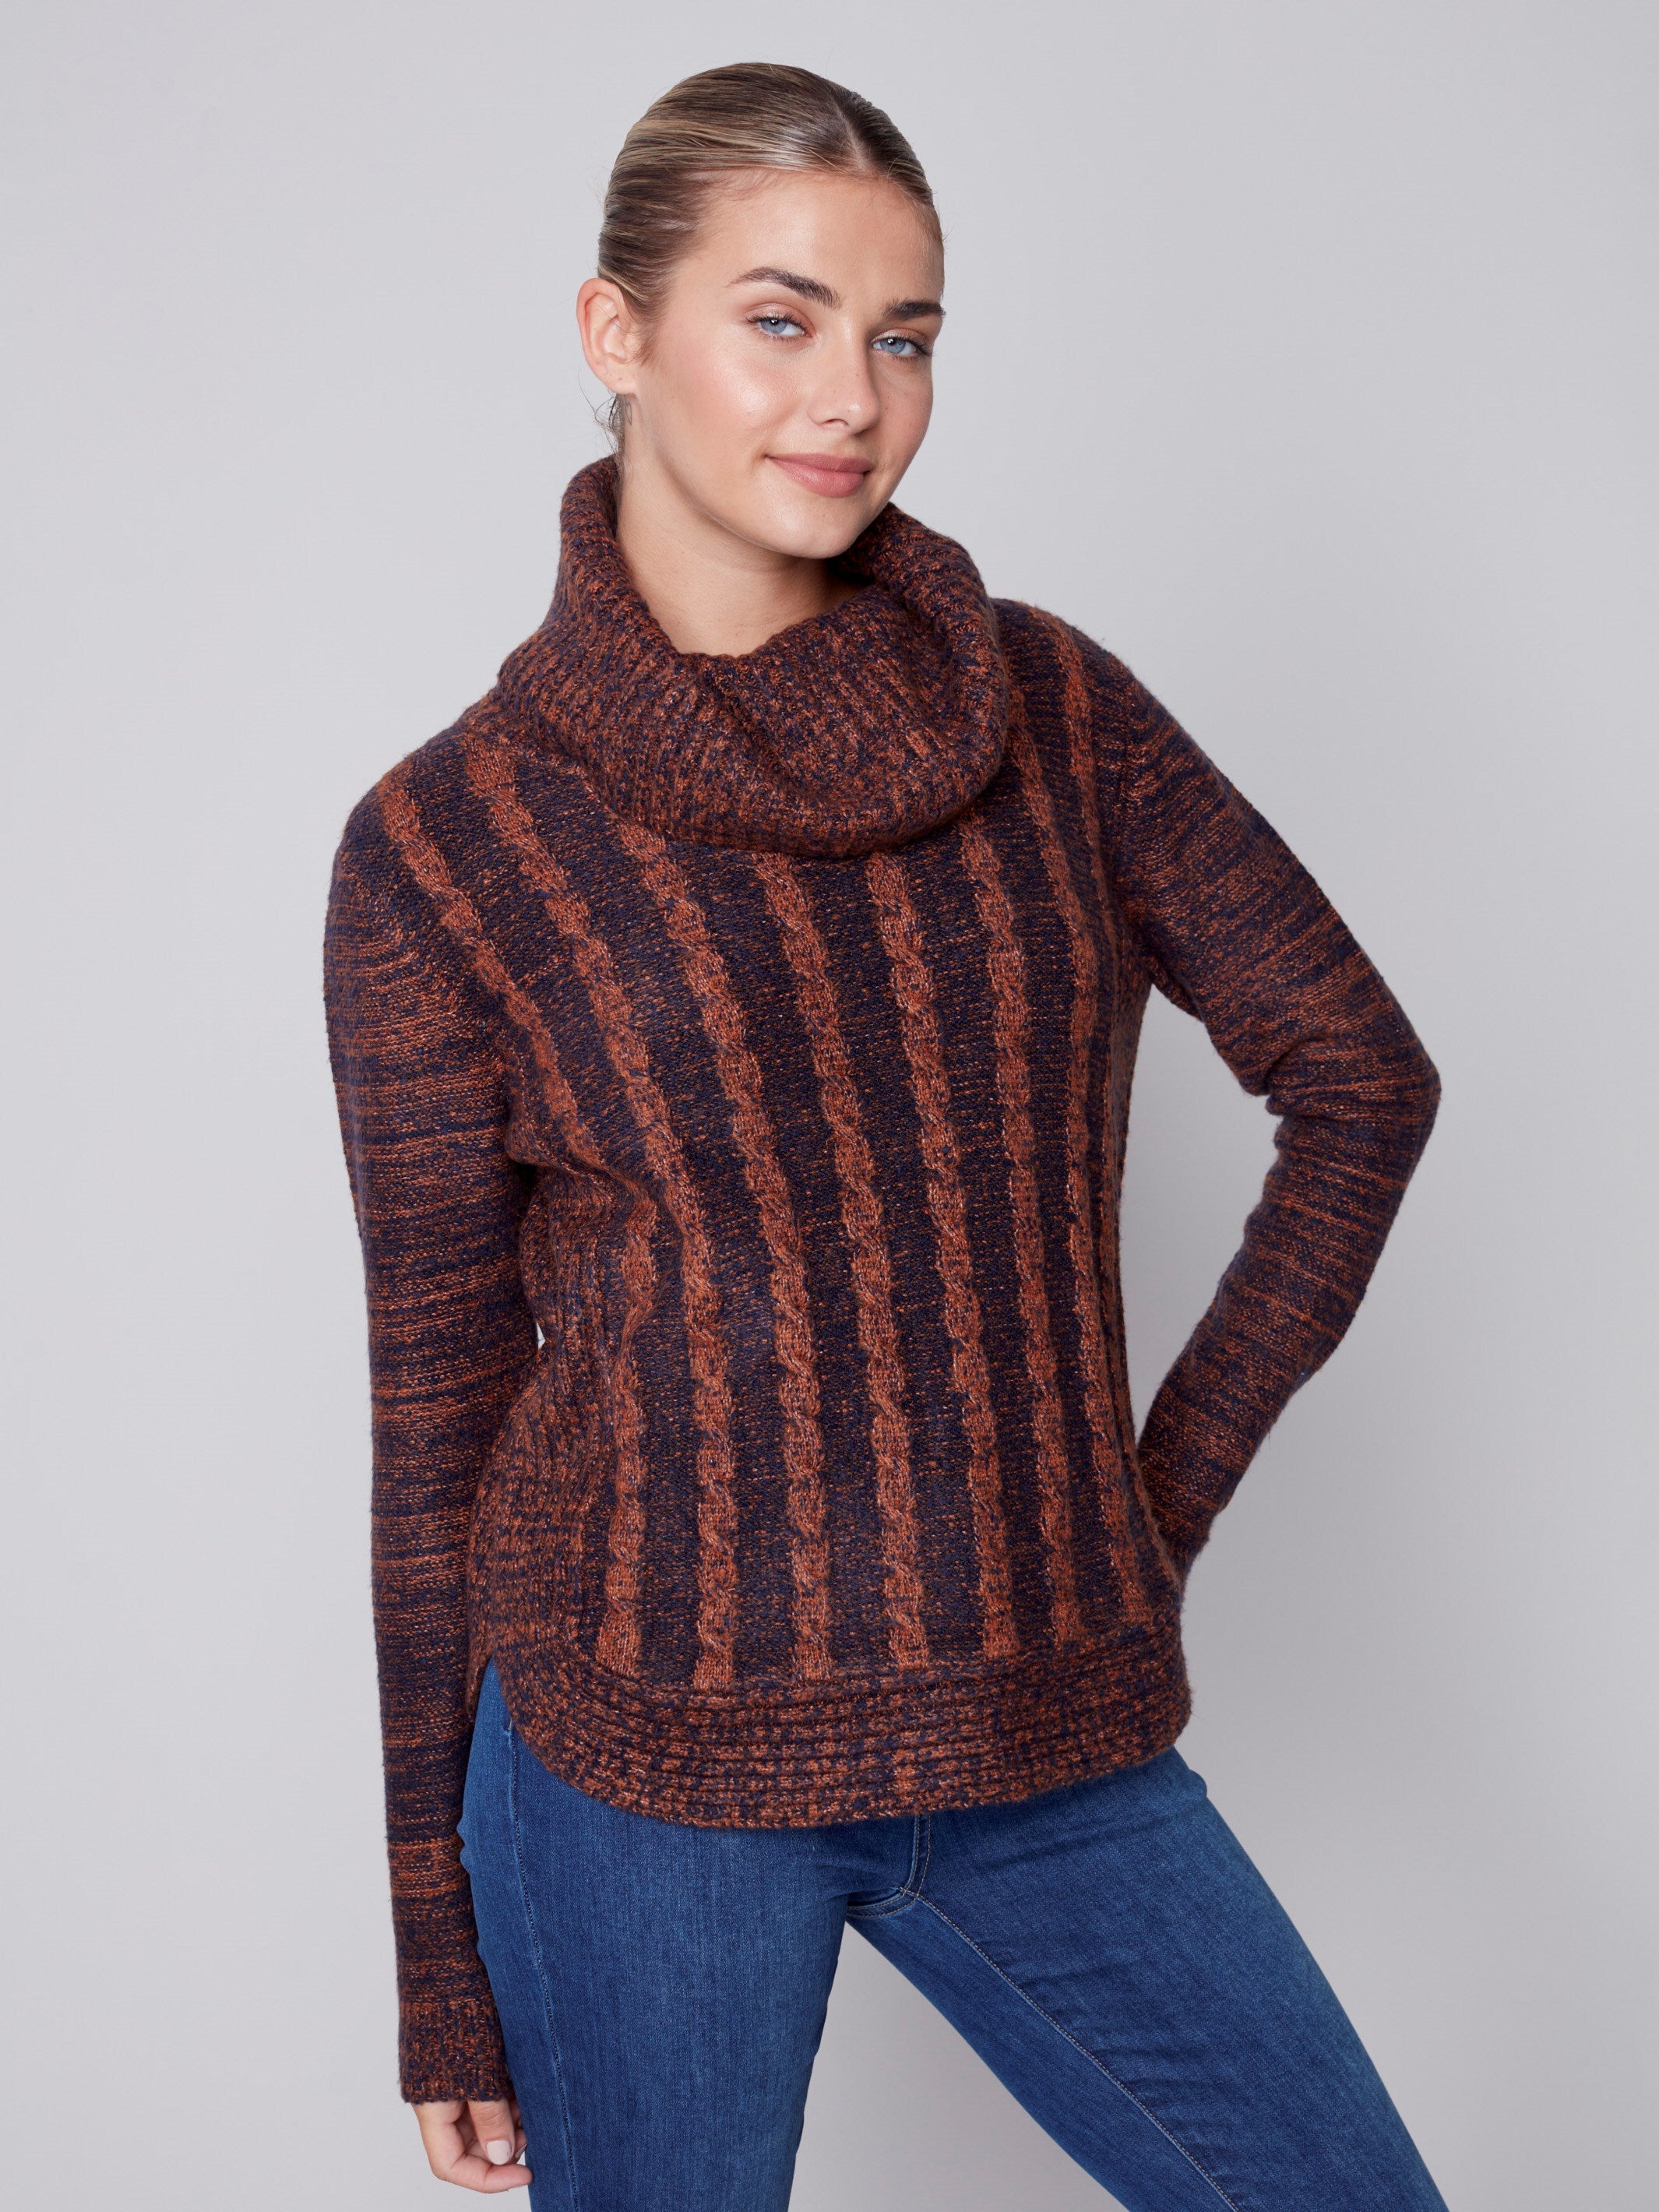 Two-Toned Cable Knit Cowl Neck Sweater - Cinnamon